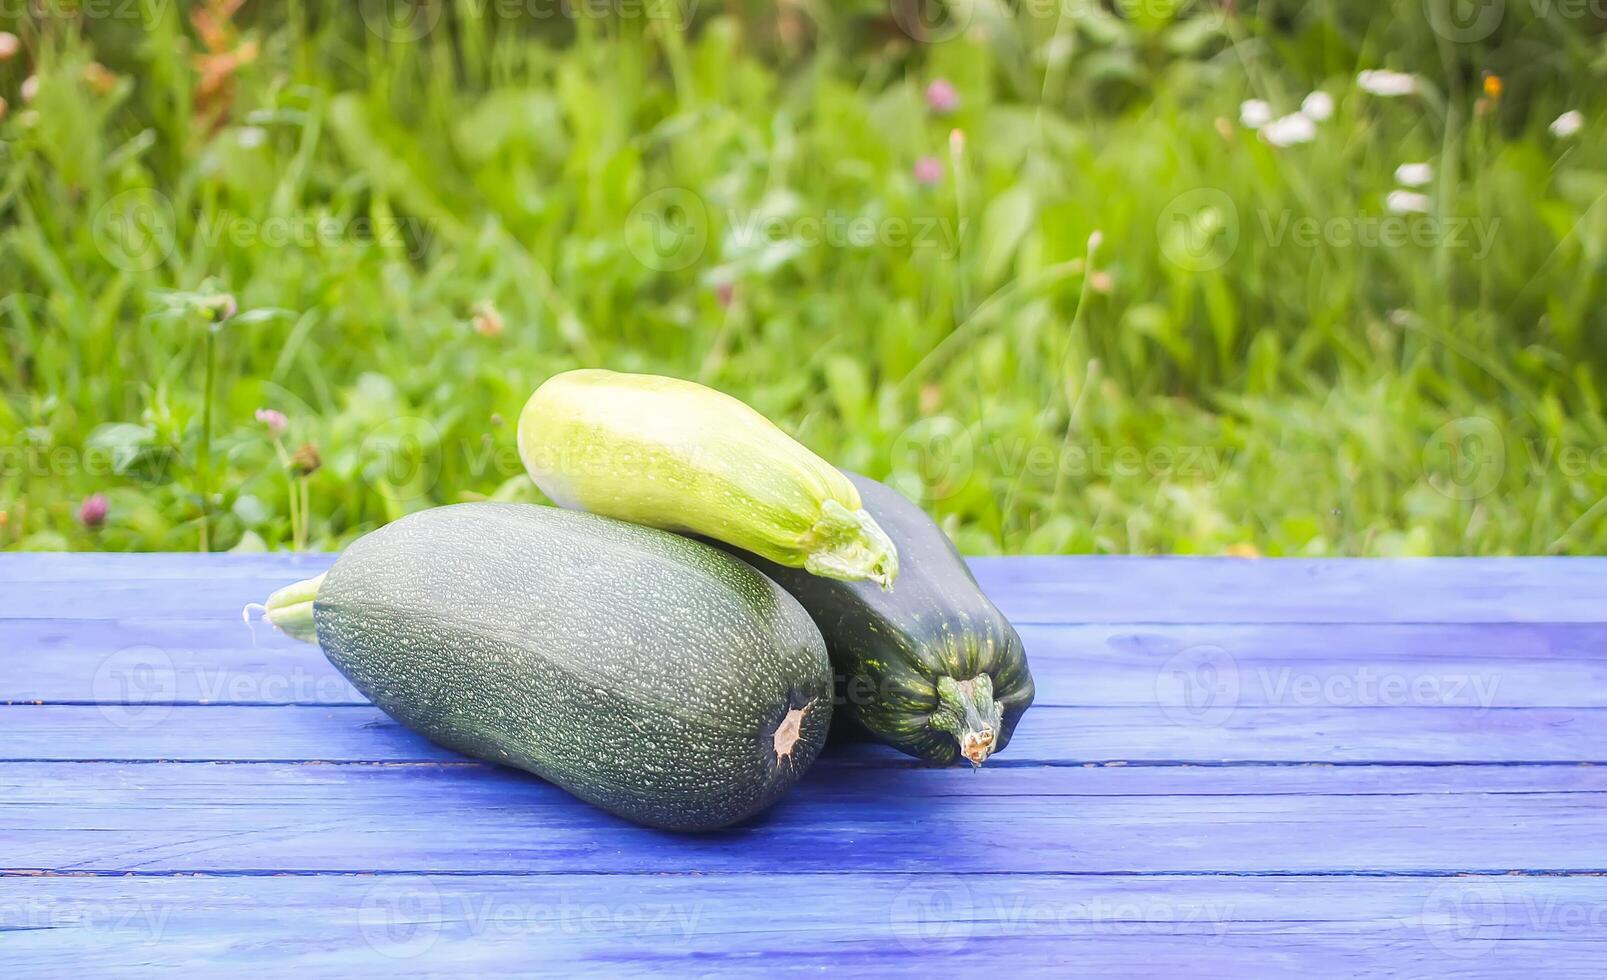 Zucchini on wooden boards outdoors photo